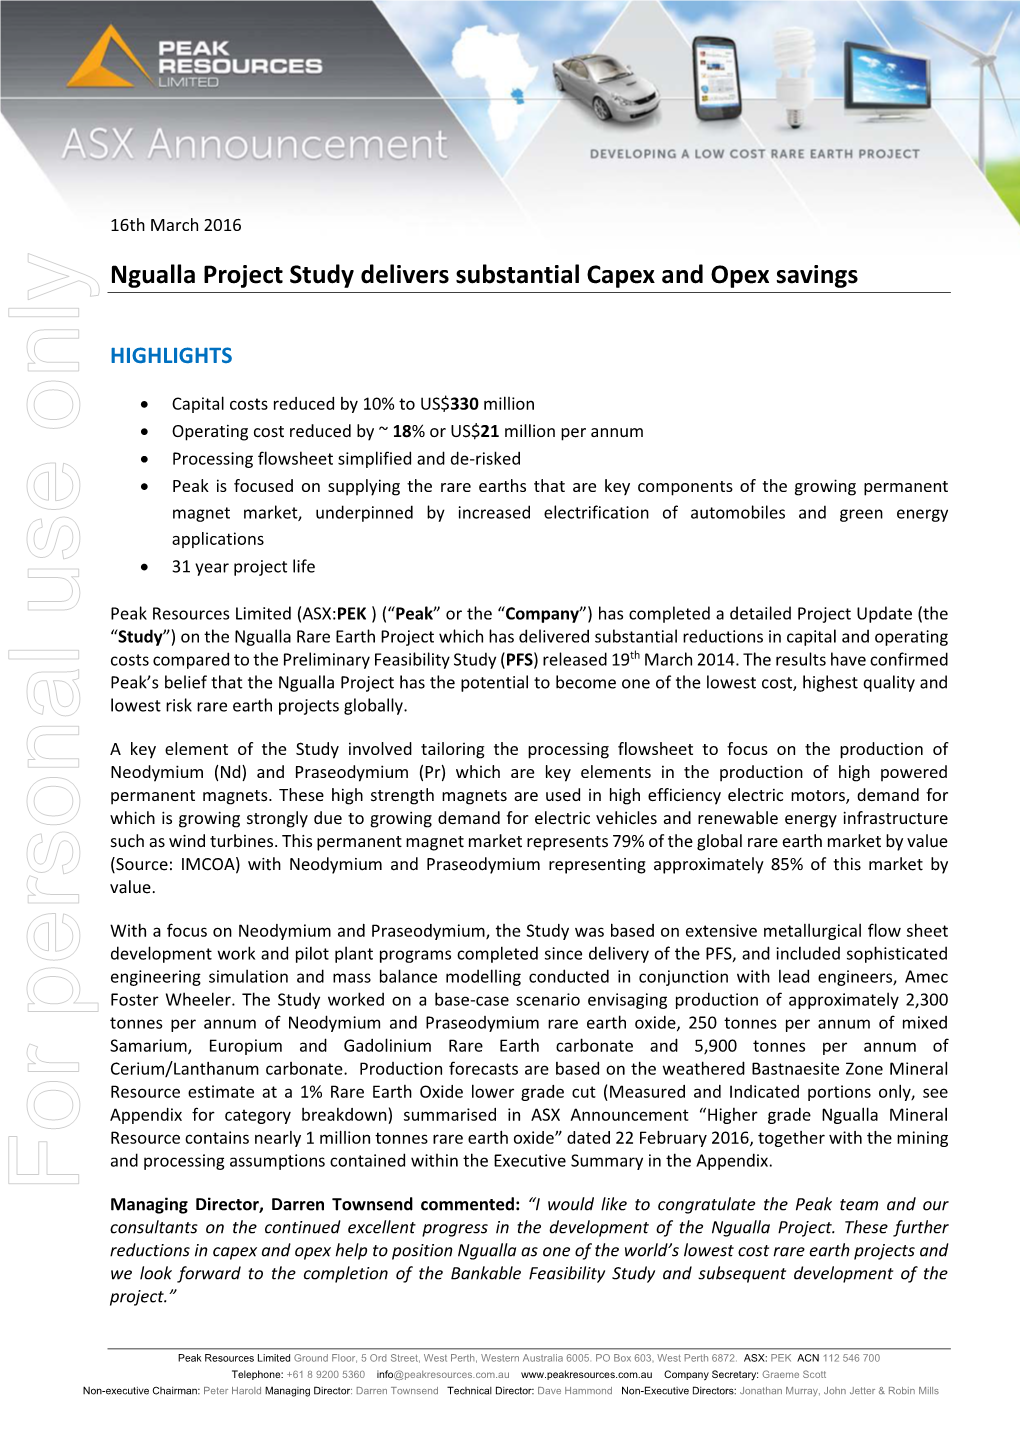 Ngualla Project Study Delivers Substantial Capex and Opex Savings